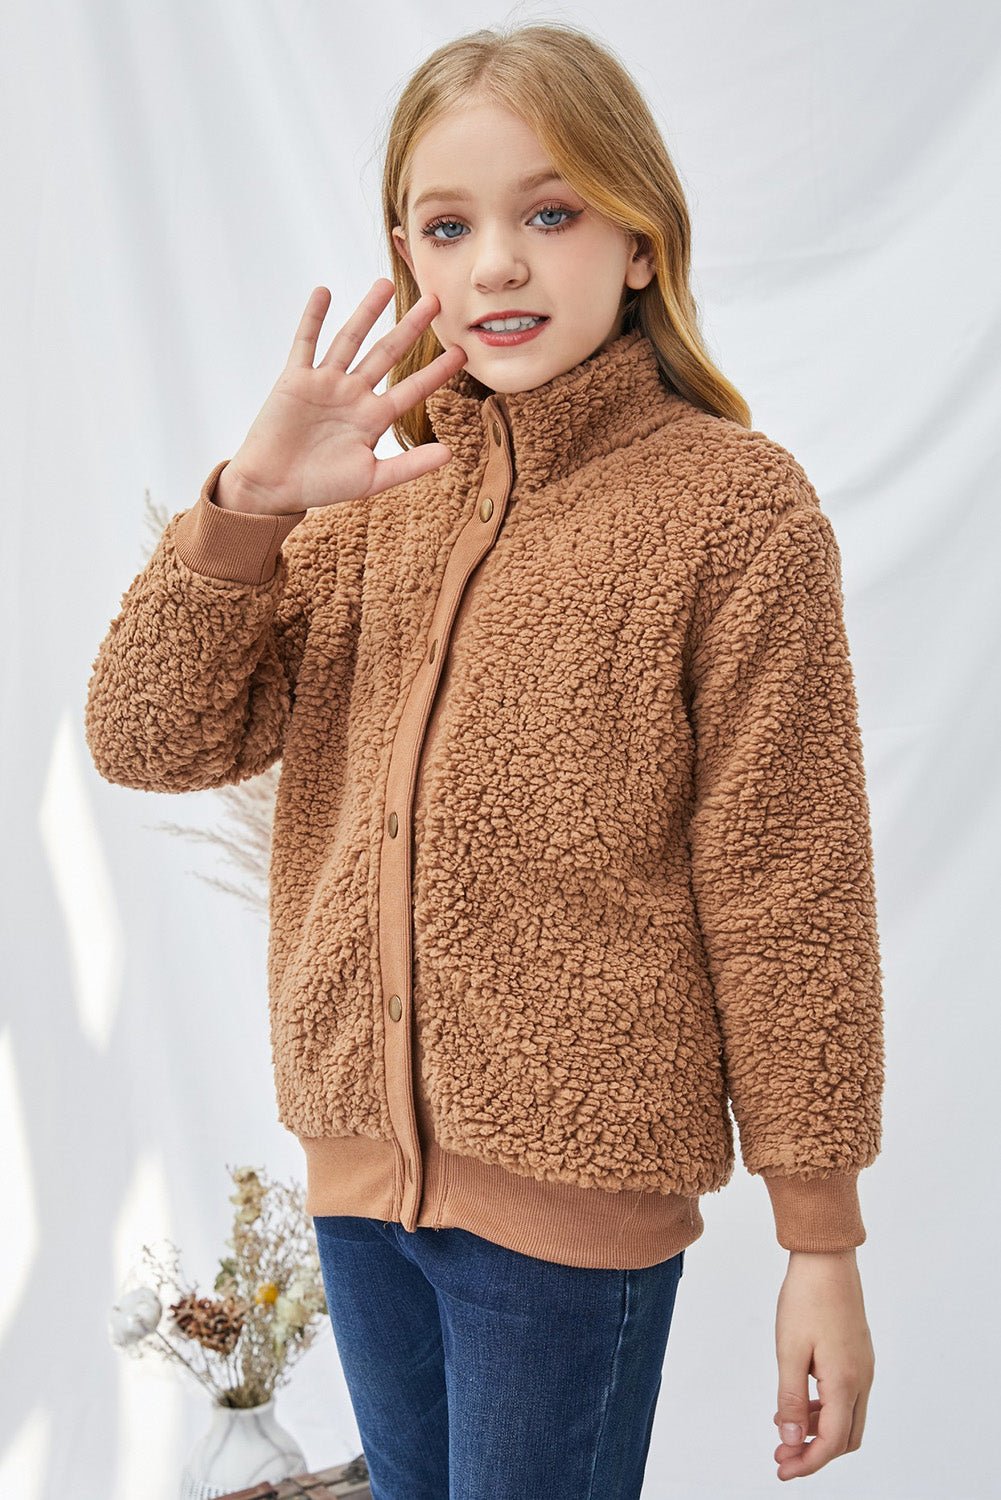 Girls Snap Front Teddy Jacket - Fashion Girl Online Store